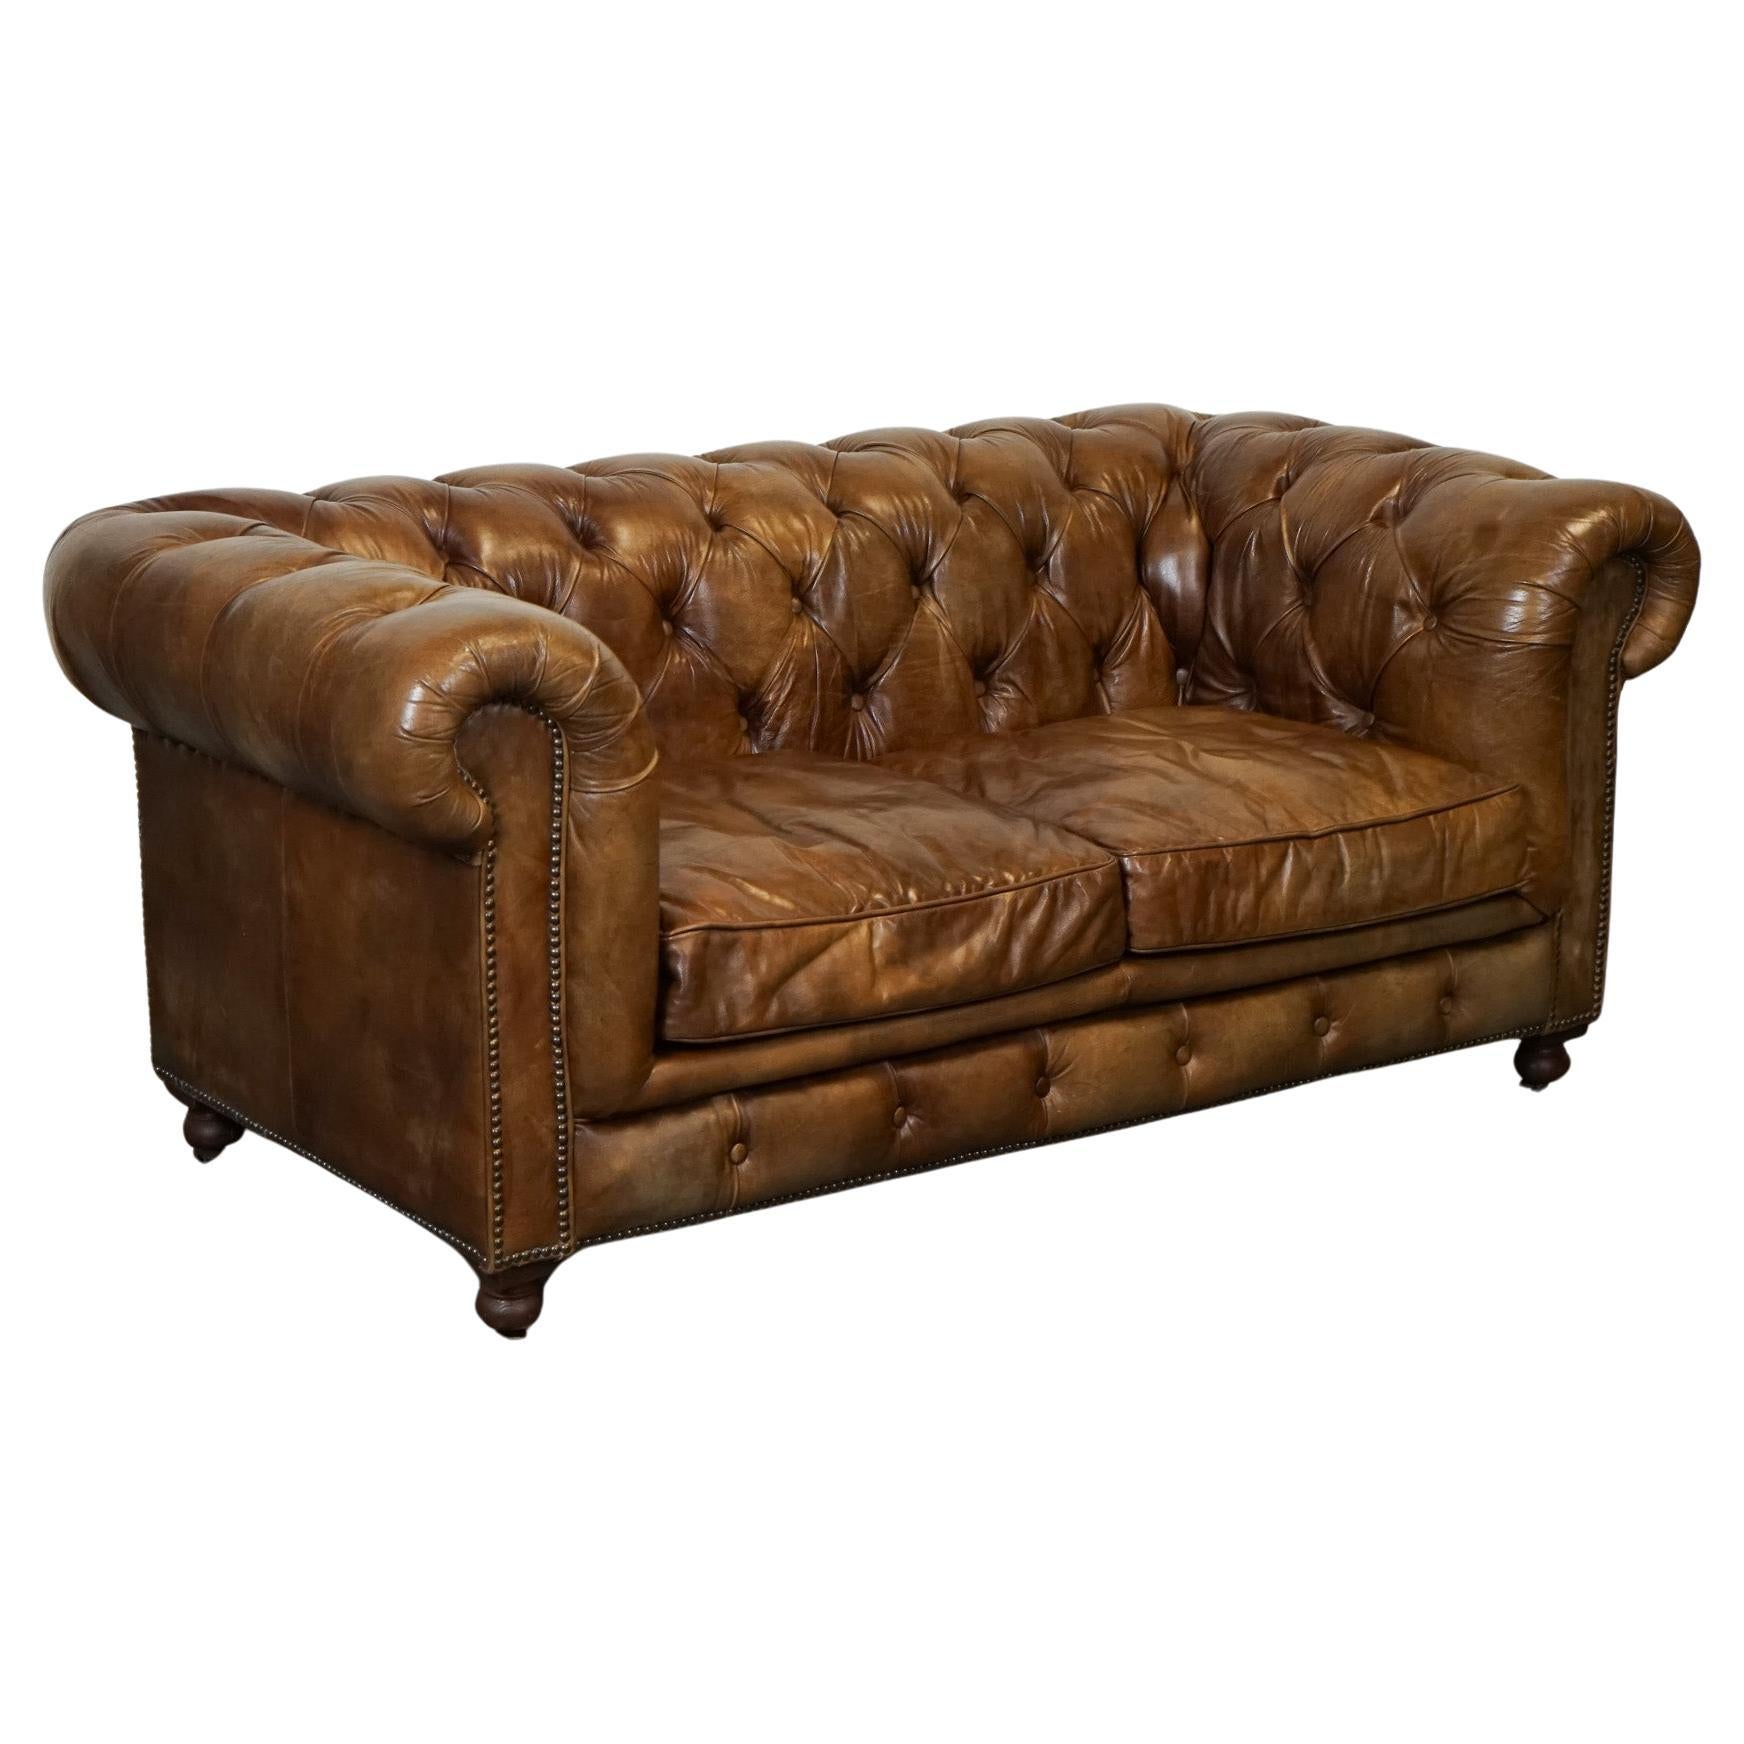 SCHÖNE TIMOTHY OULTON CHESTERFIELD SOFA BY HALO HERiTAGE BROWN LEATHER J1 im Angebot